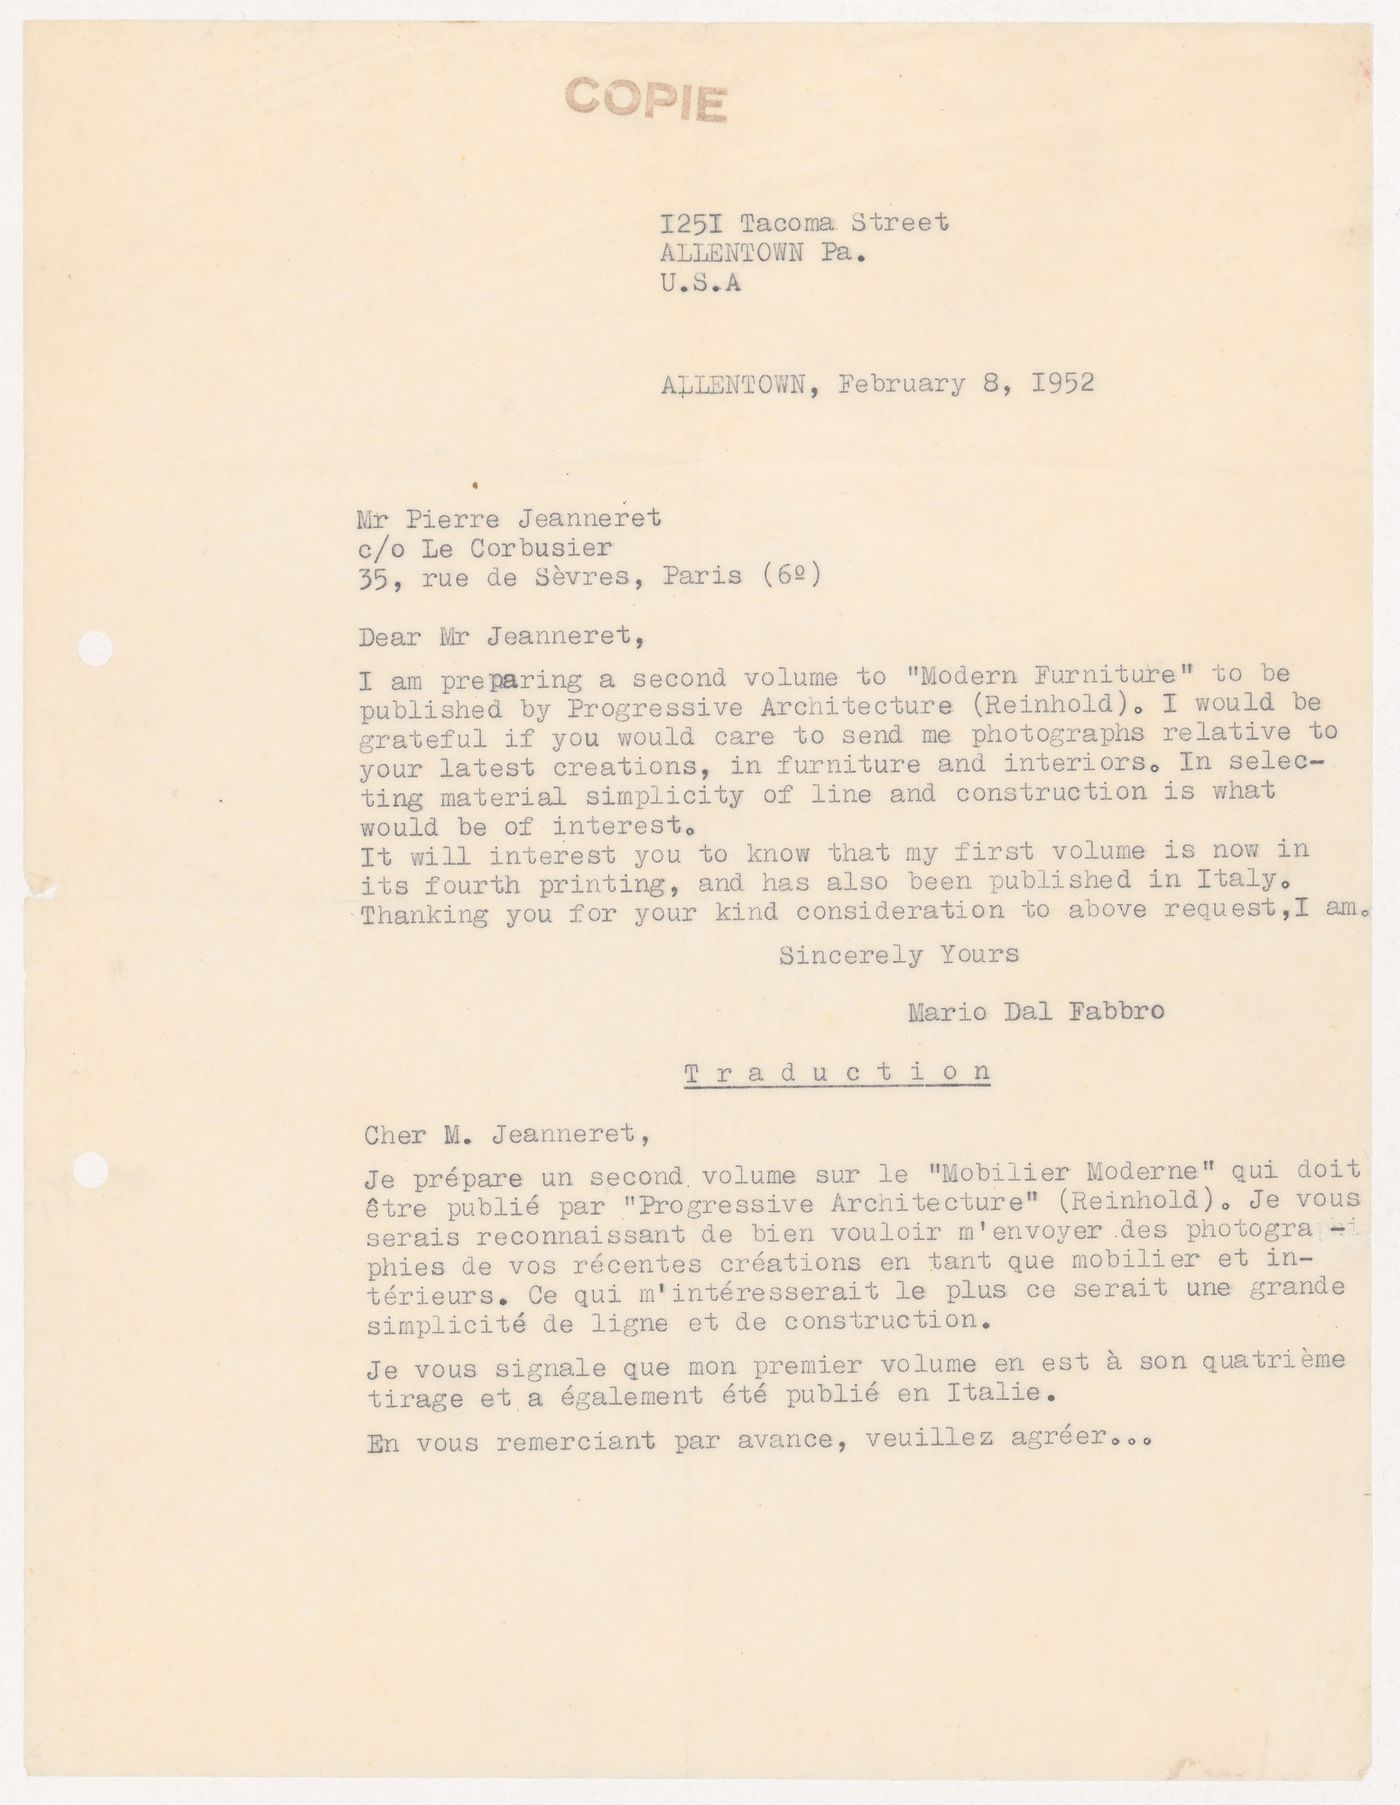 Transcript and translation of a letter from Mario dal Fabbro to Pierre Jeanneret